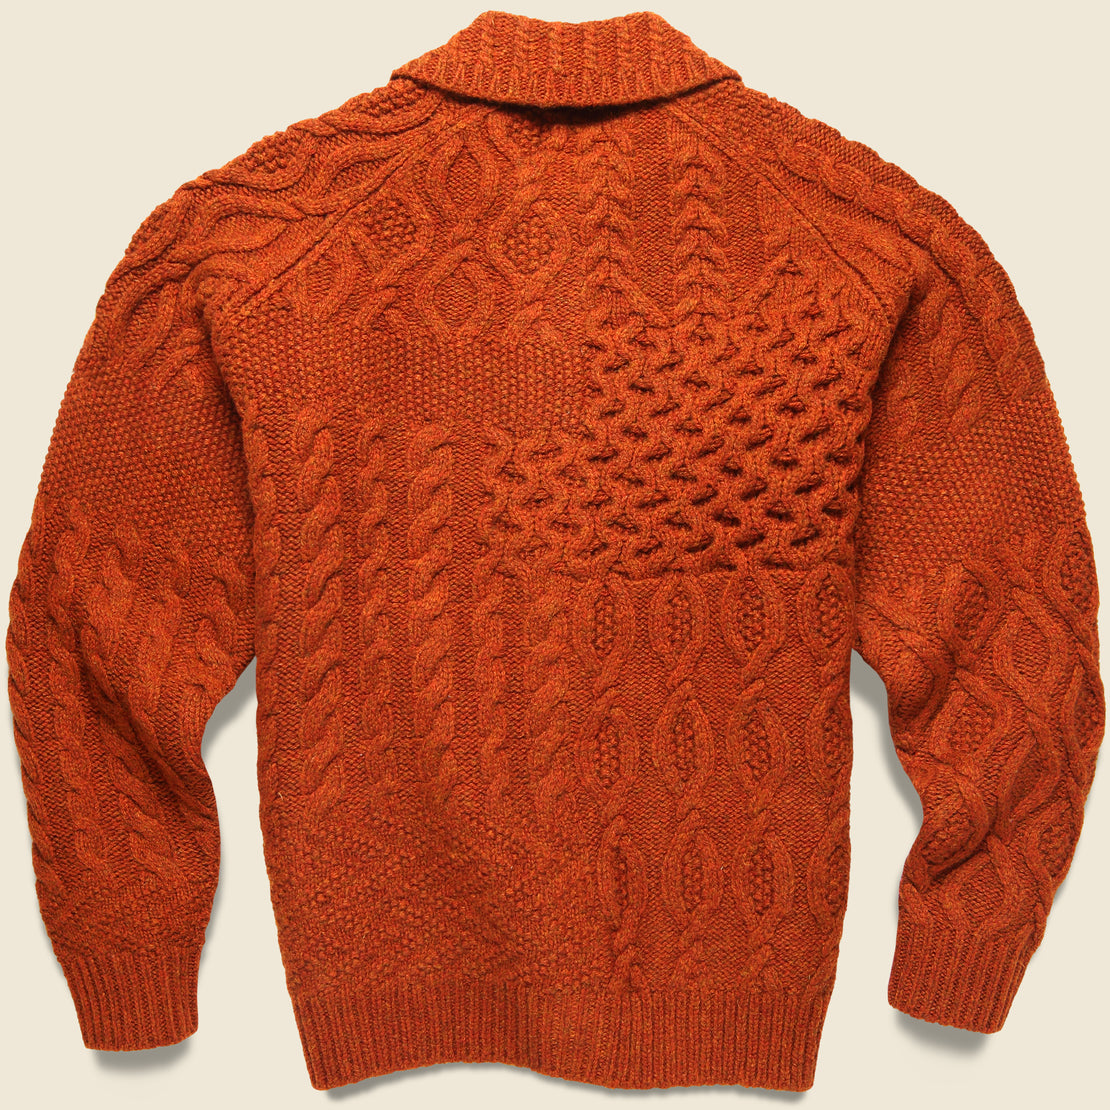 Alan Patchwork Cardigan - Orange - BEAMS+ - STAG Provisions - Tops - Sweater